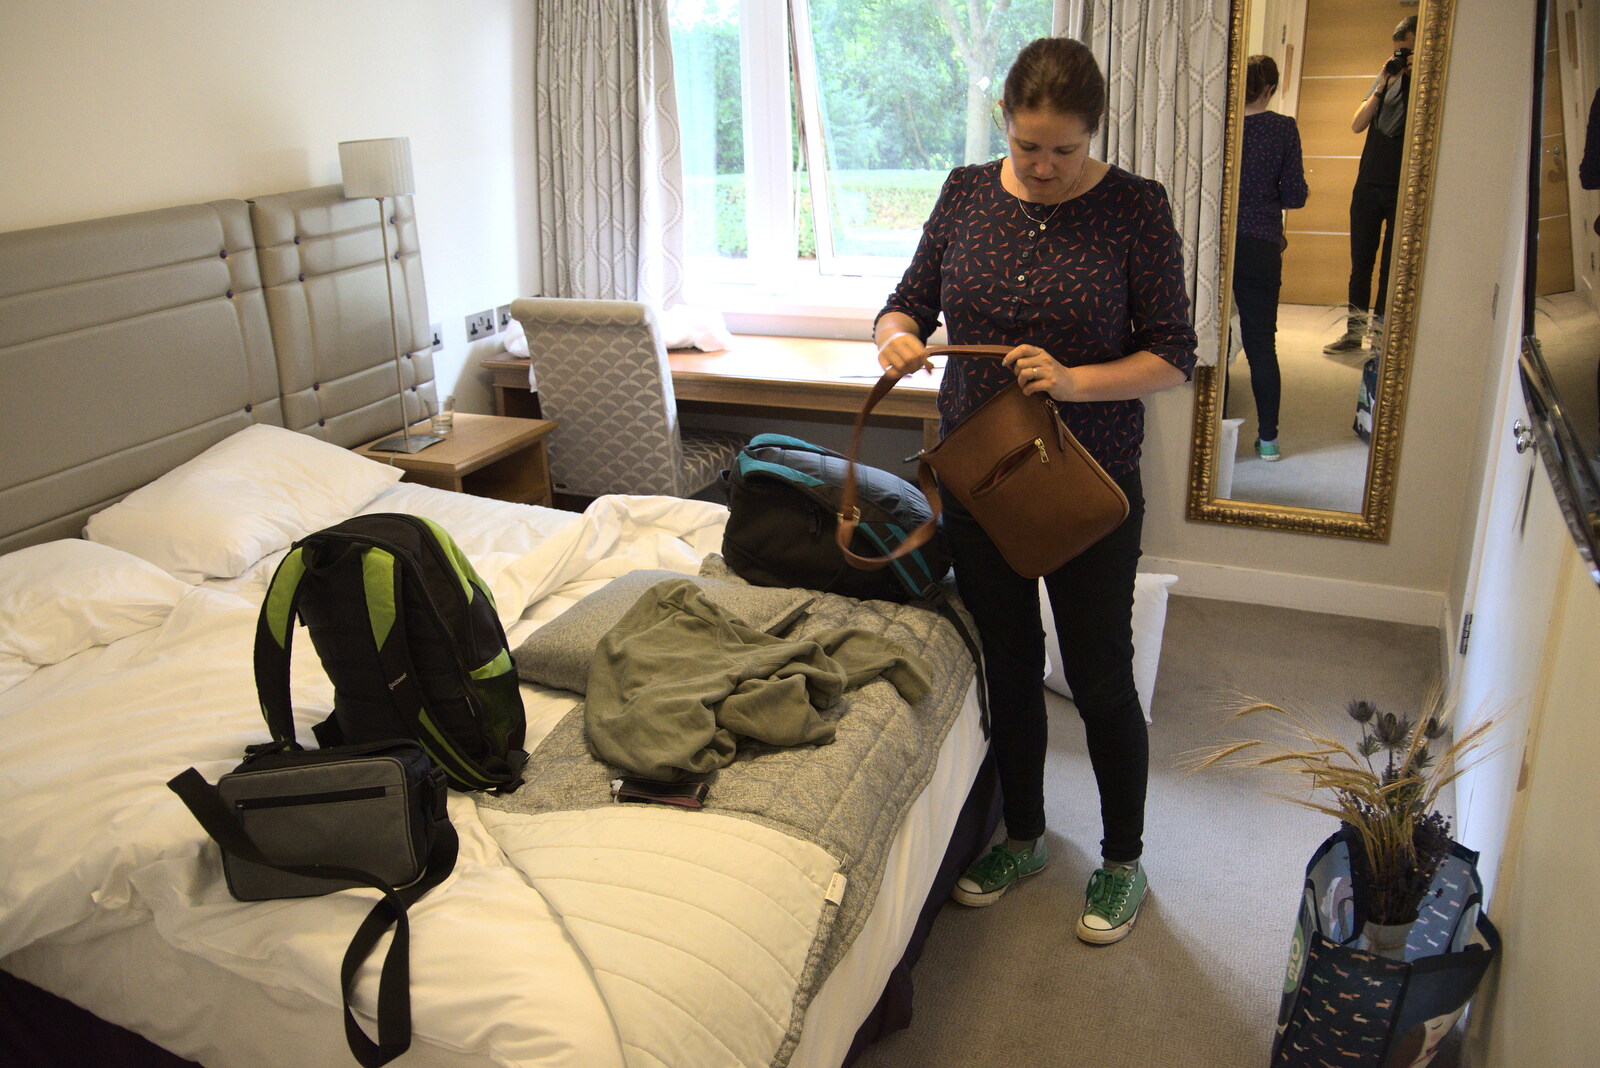 Back in the room, we pack up our things from Petay's Wedding Reception, Fanhams Hall, Ware, Hertfordshire - 20th August 2021